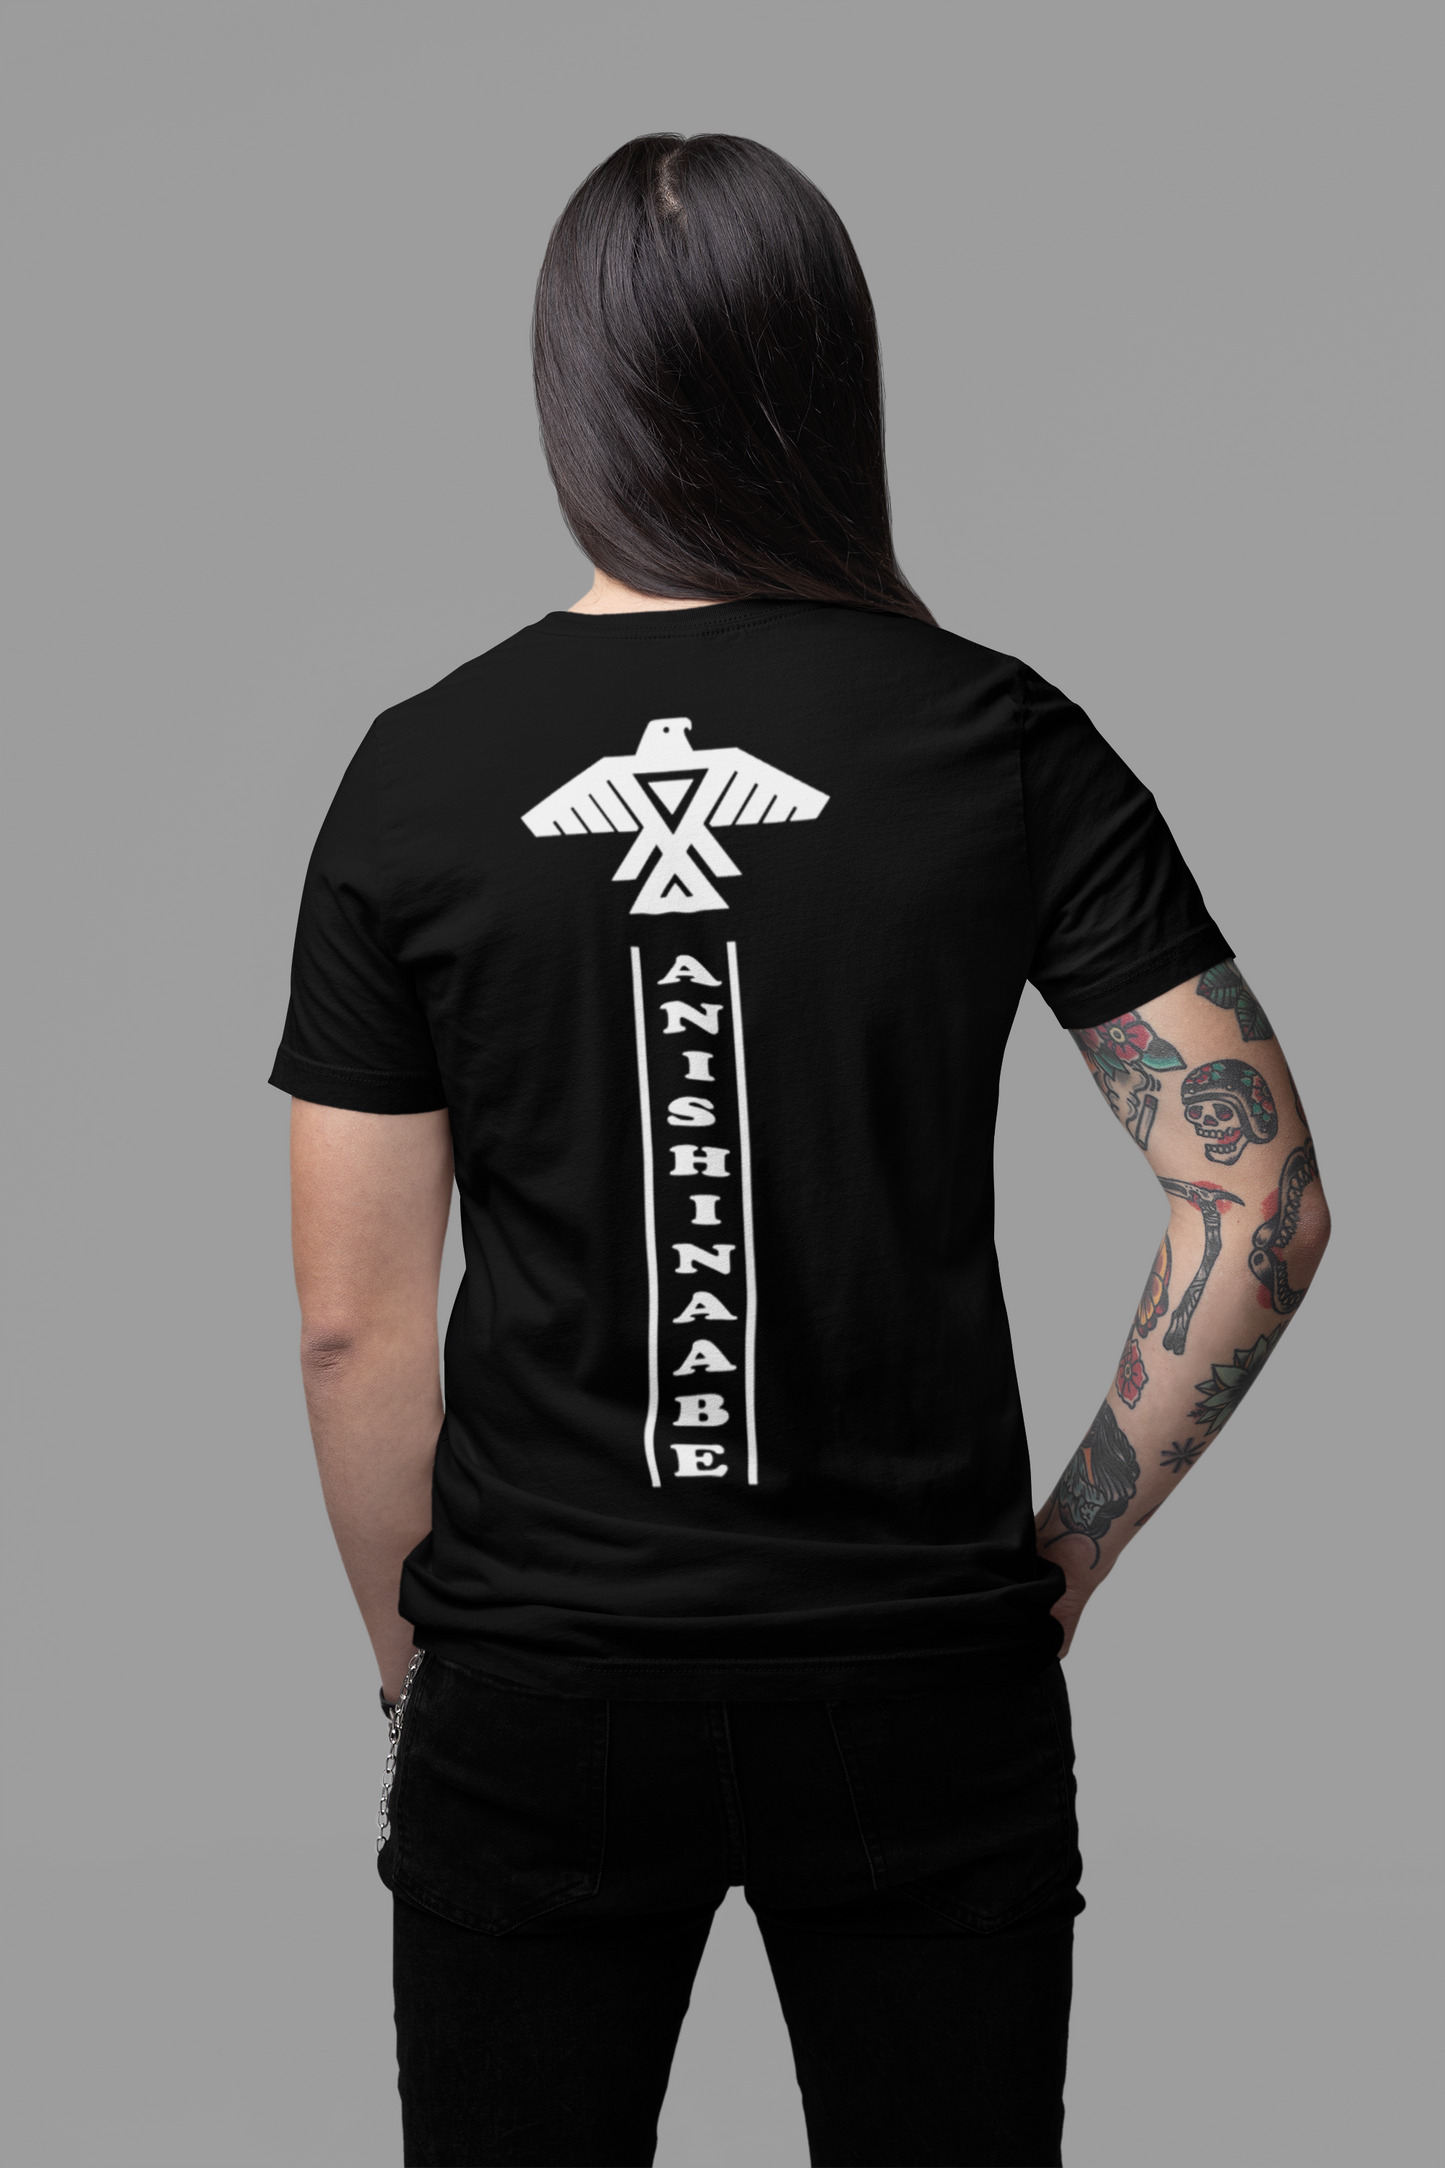 Anishinaabe front and back Totem Style t shirt (multiple color options)